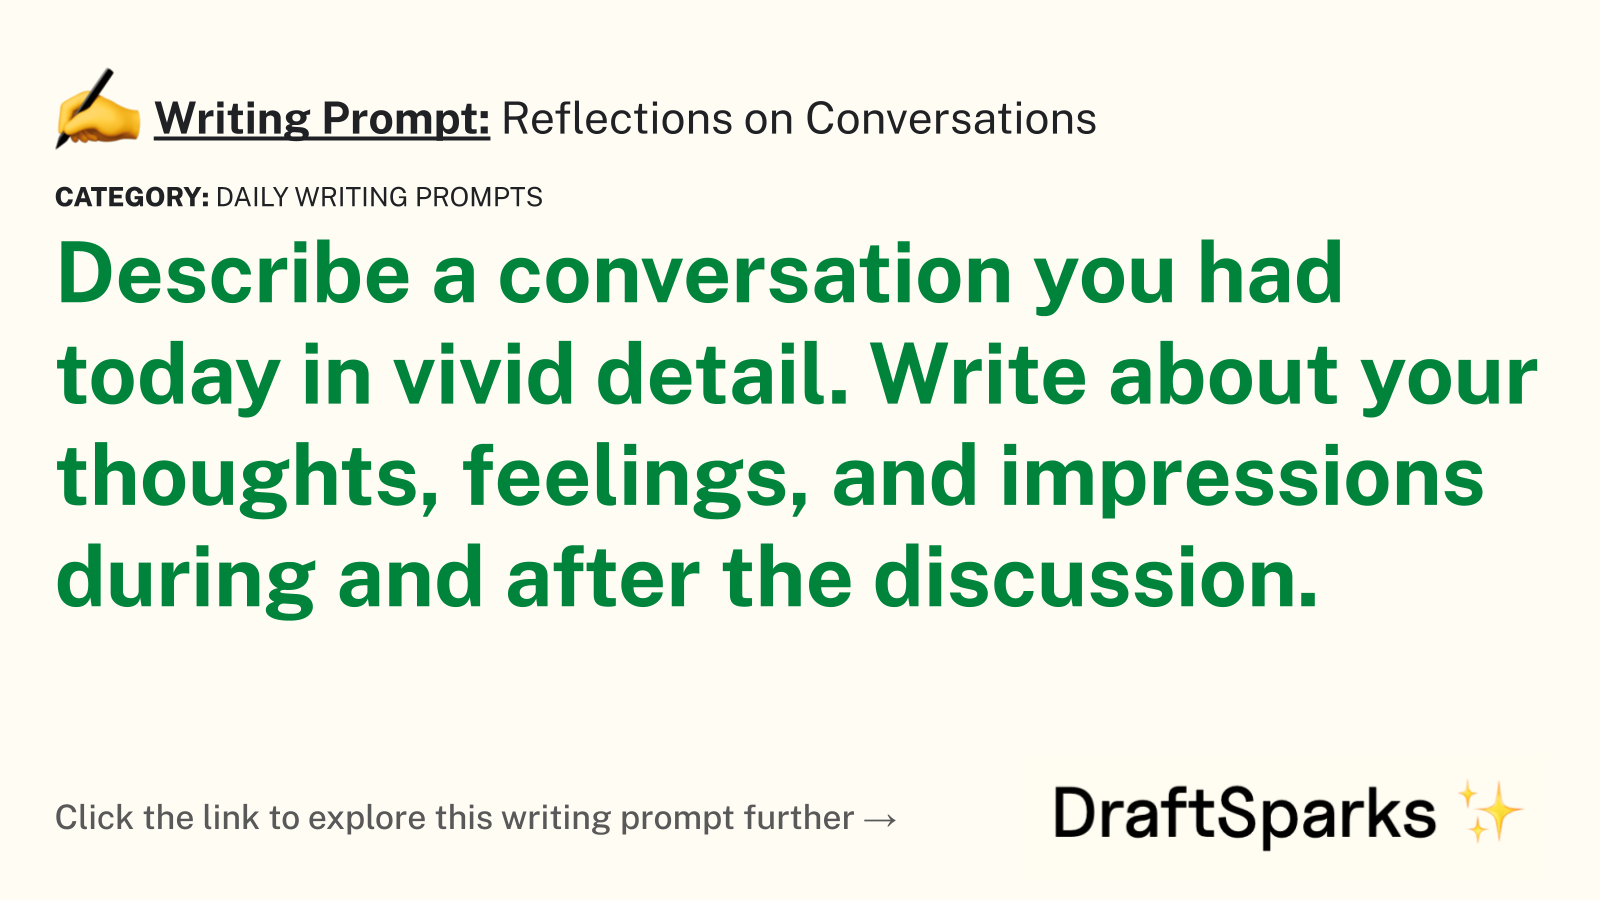 Reflections on Conversations